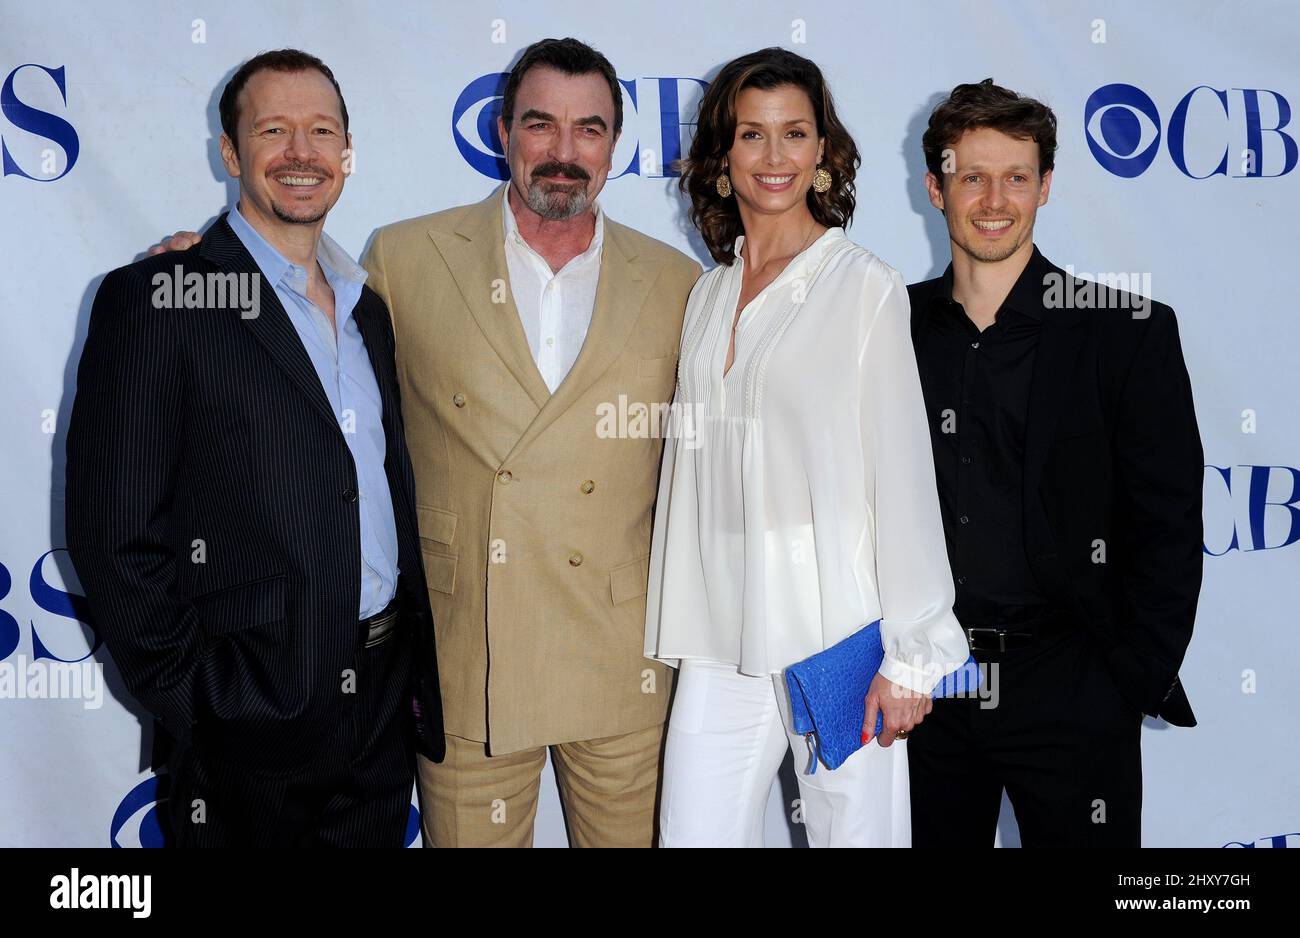 See the Throwback Photo Bridget Moynahan Posted for Donnie